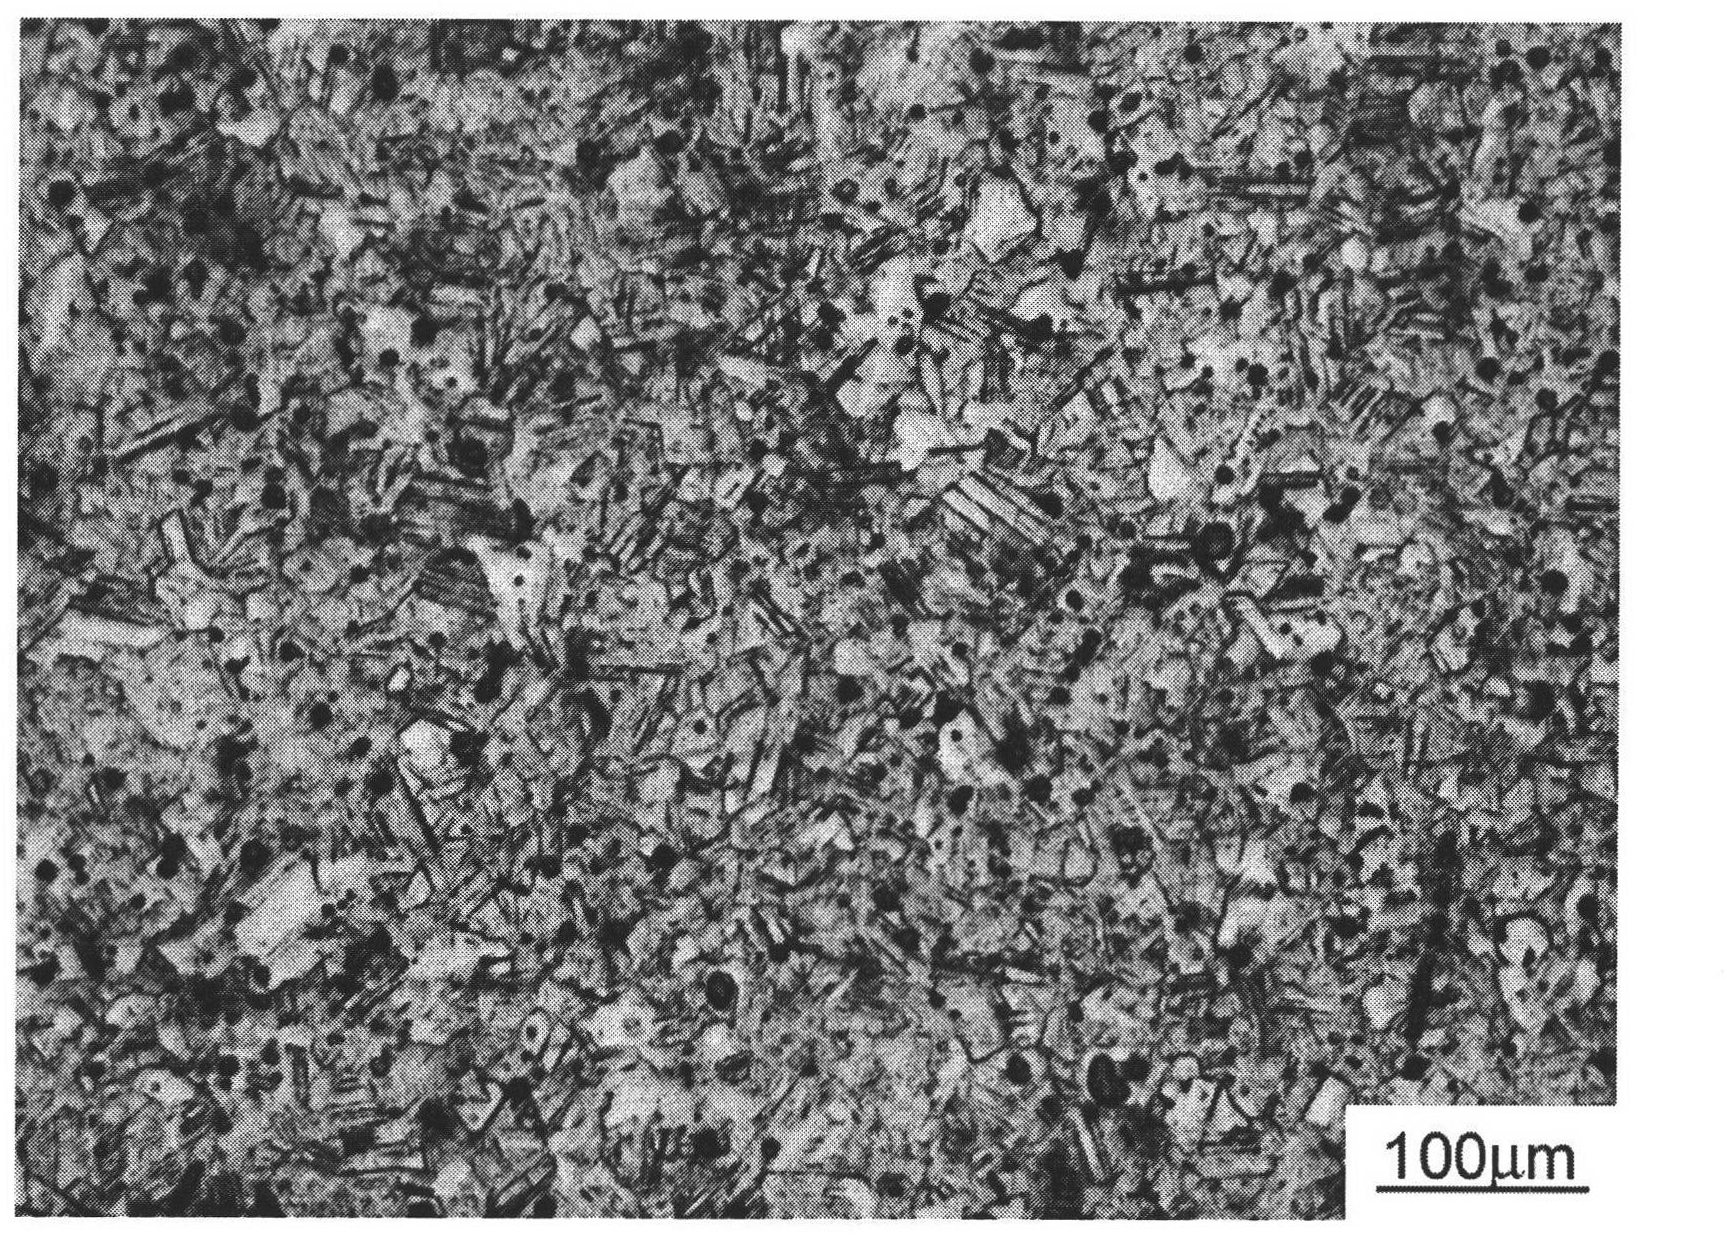 Electrolytic corrosion method of high strength and high toughness Fe-Mn-C series twinning induced plasticity steel